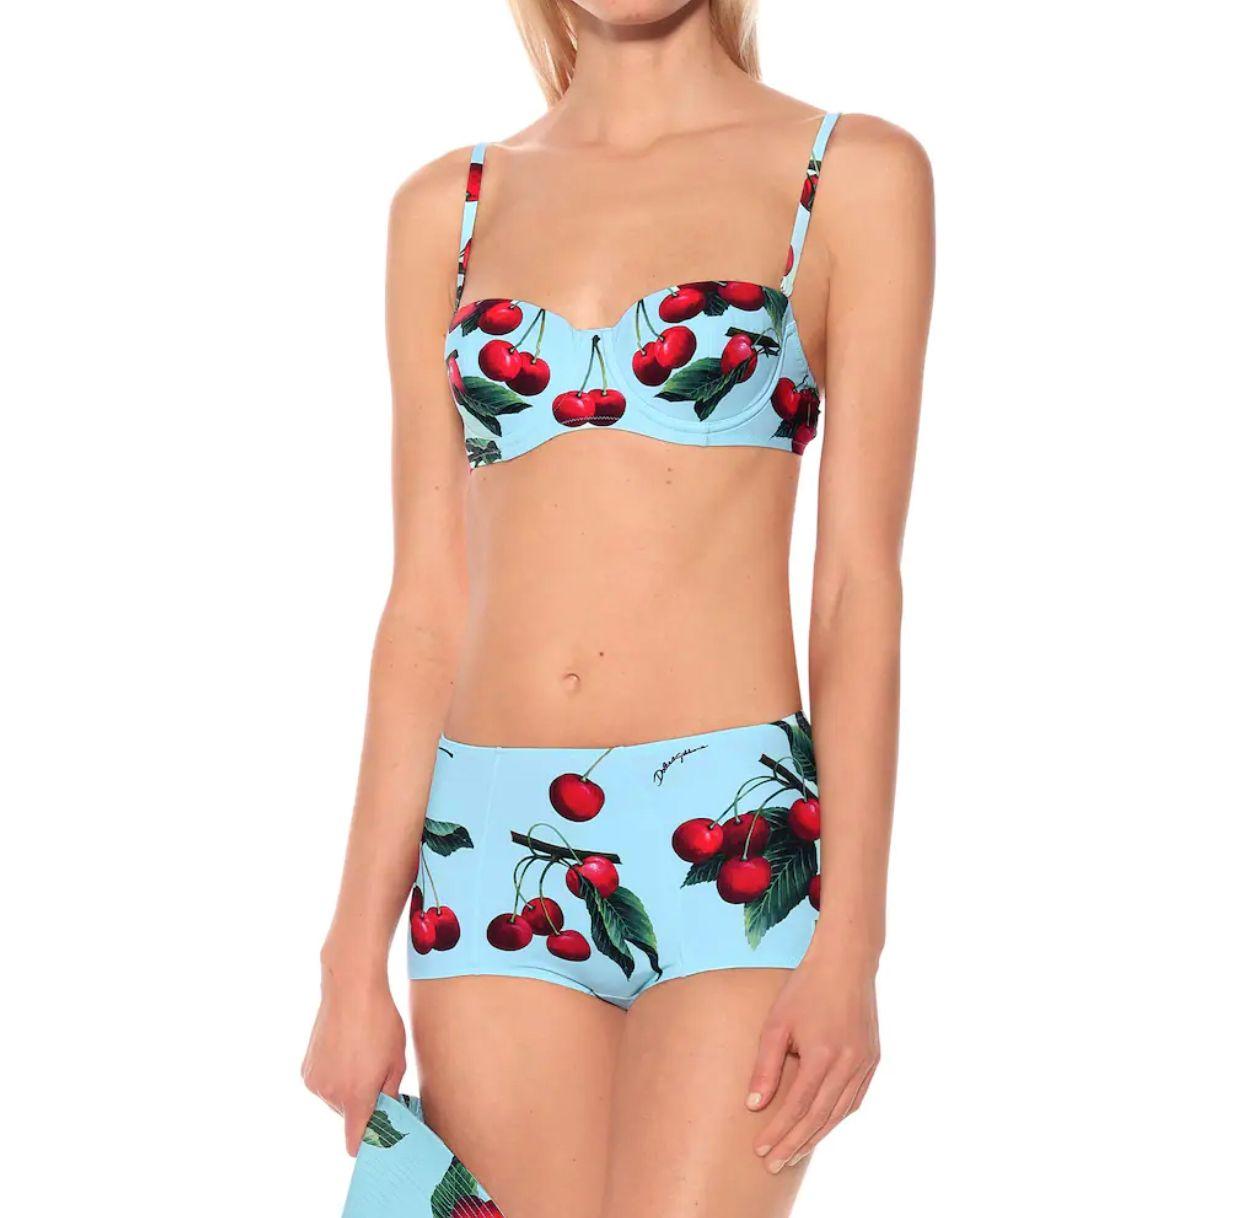 Dolce & Gabbana romantic built-in balcony bra bikini top offers a sophisticated look thanks to the CHERRY print and is made of the precious “sensitive fabric”. The shaped cups guarantee structure and support; 
The bikini bottom with high waistline